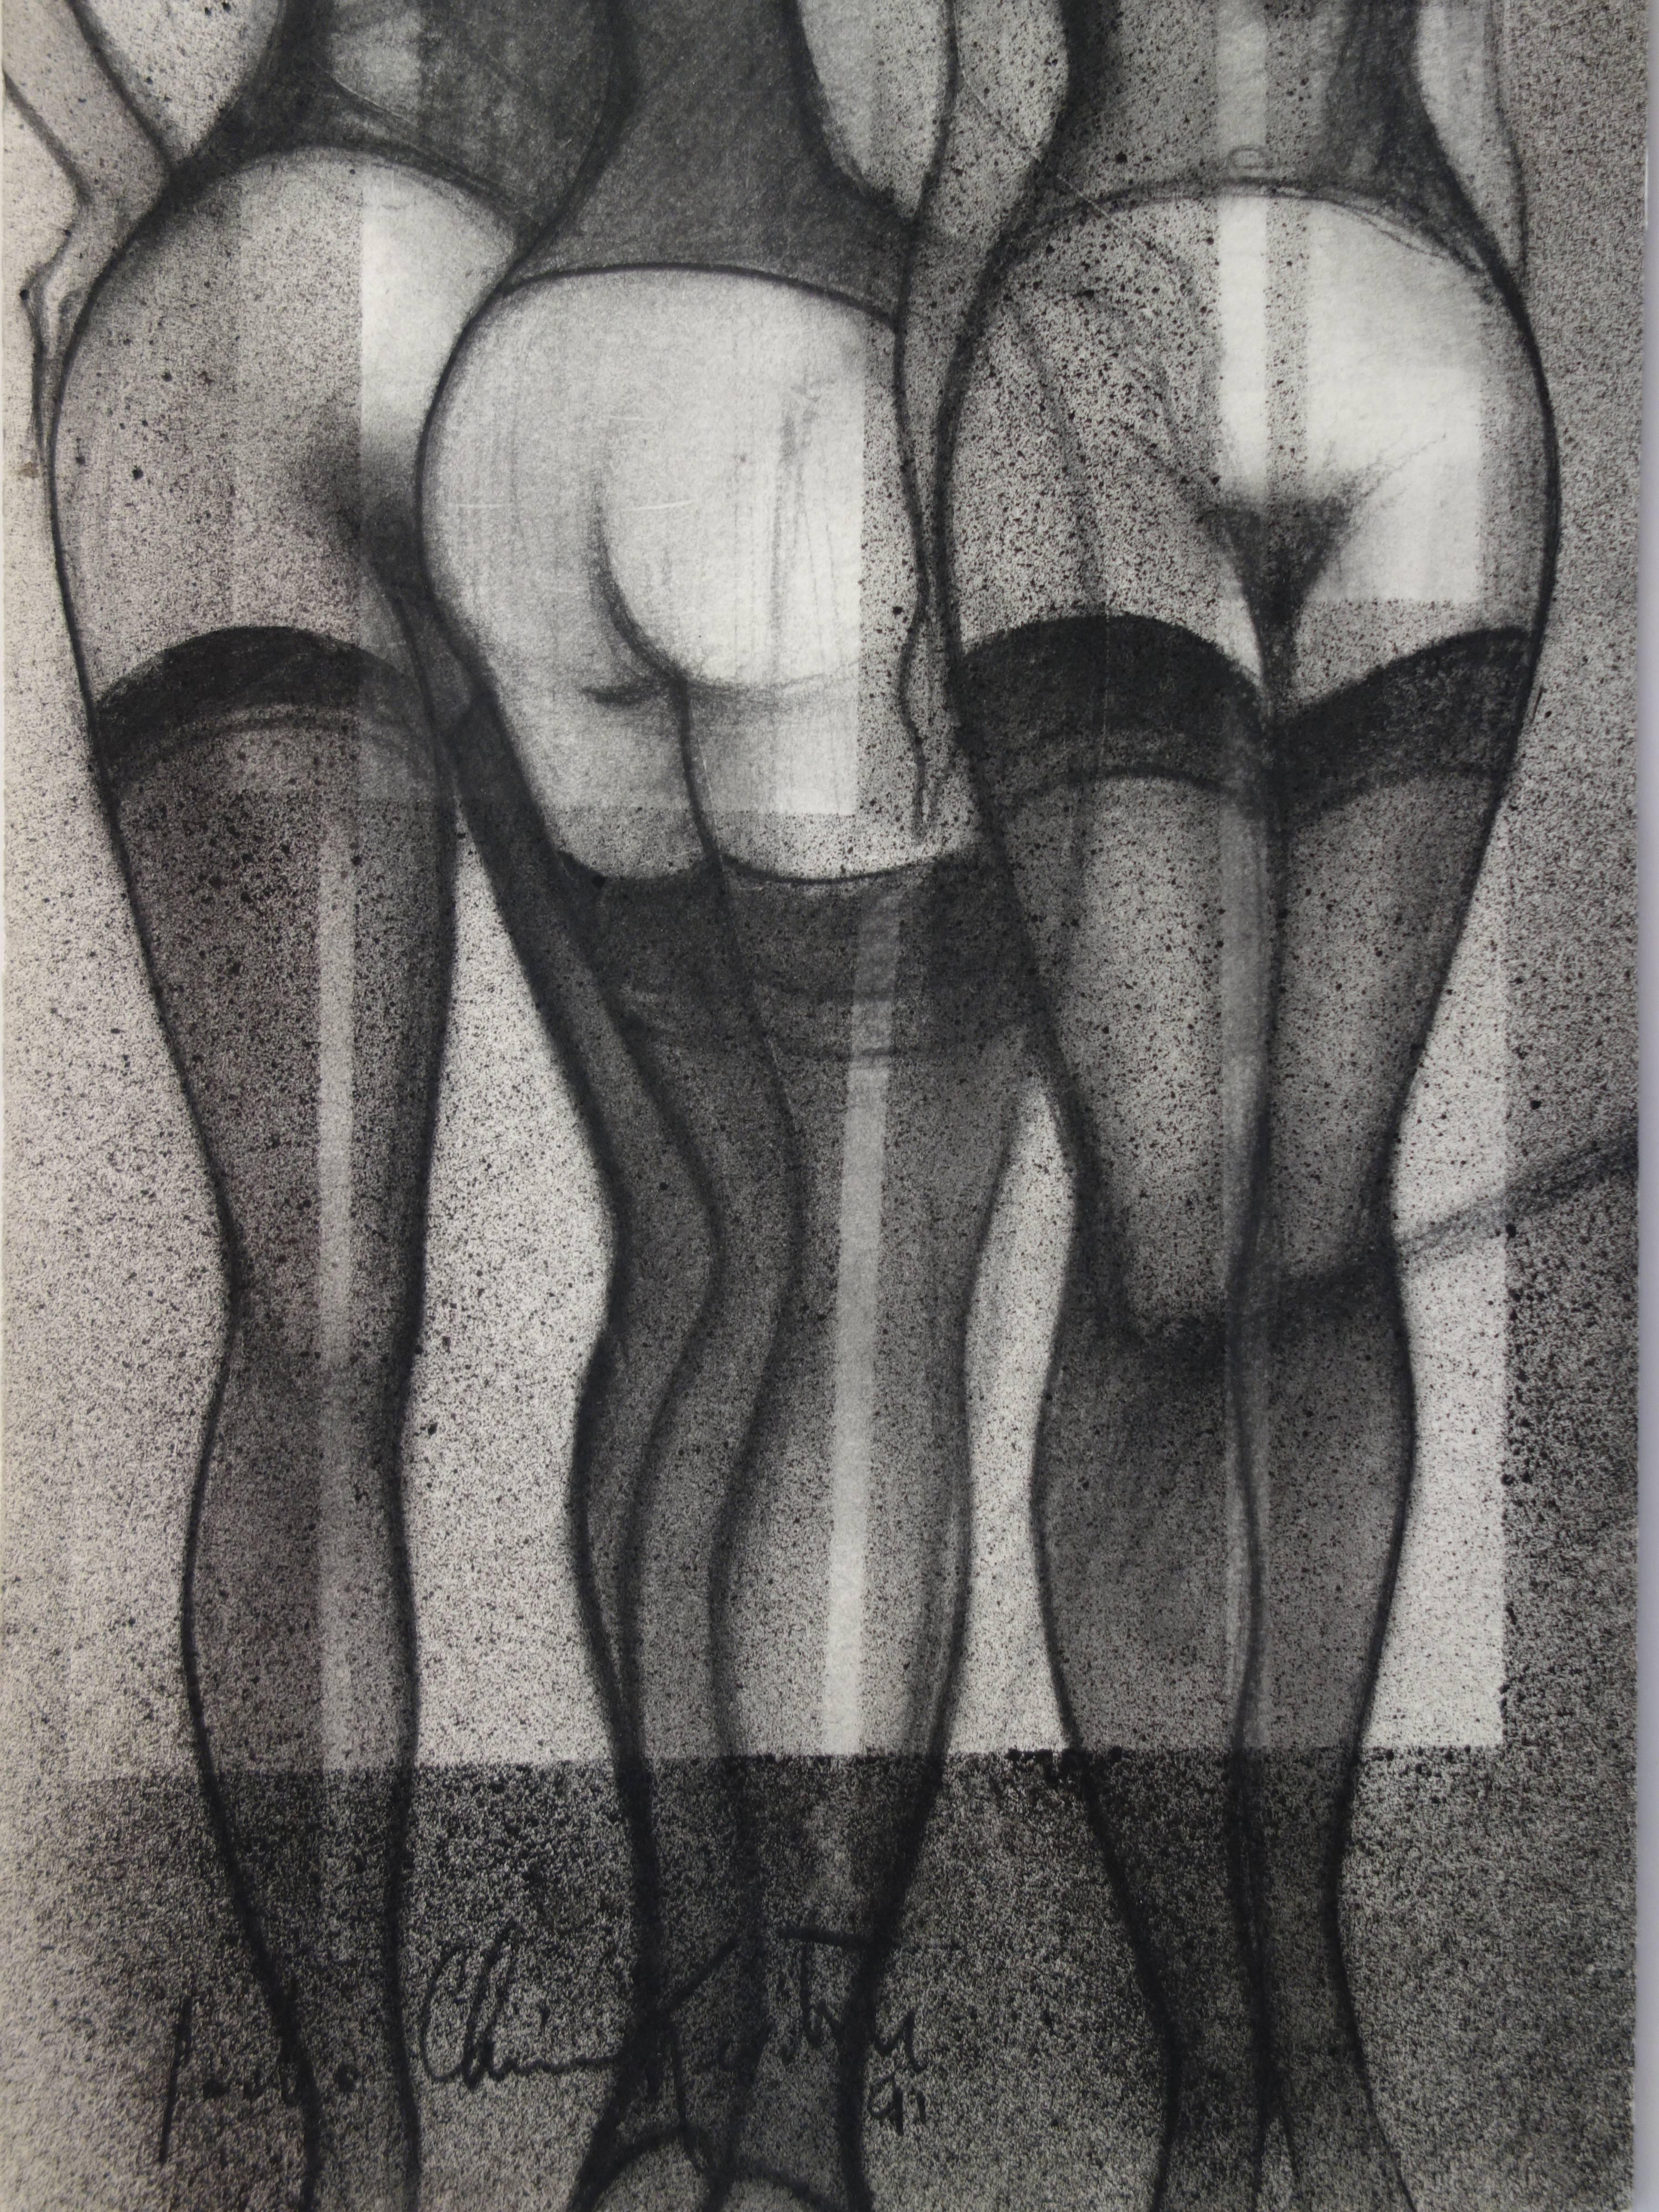 Three Graces with Garters - Original Signed Charcoal Drawing - 1991 - Black Nude by Sacha Chimkevitch